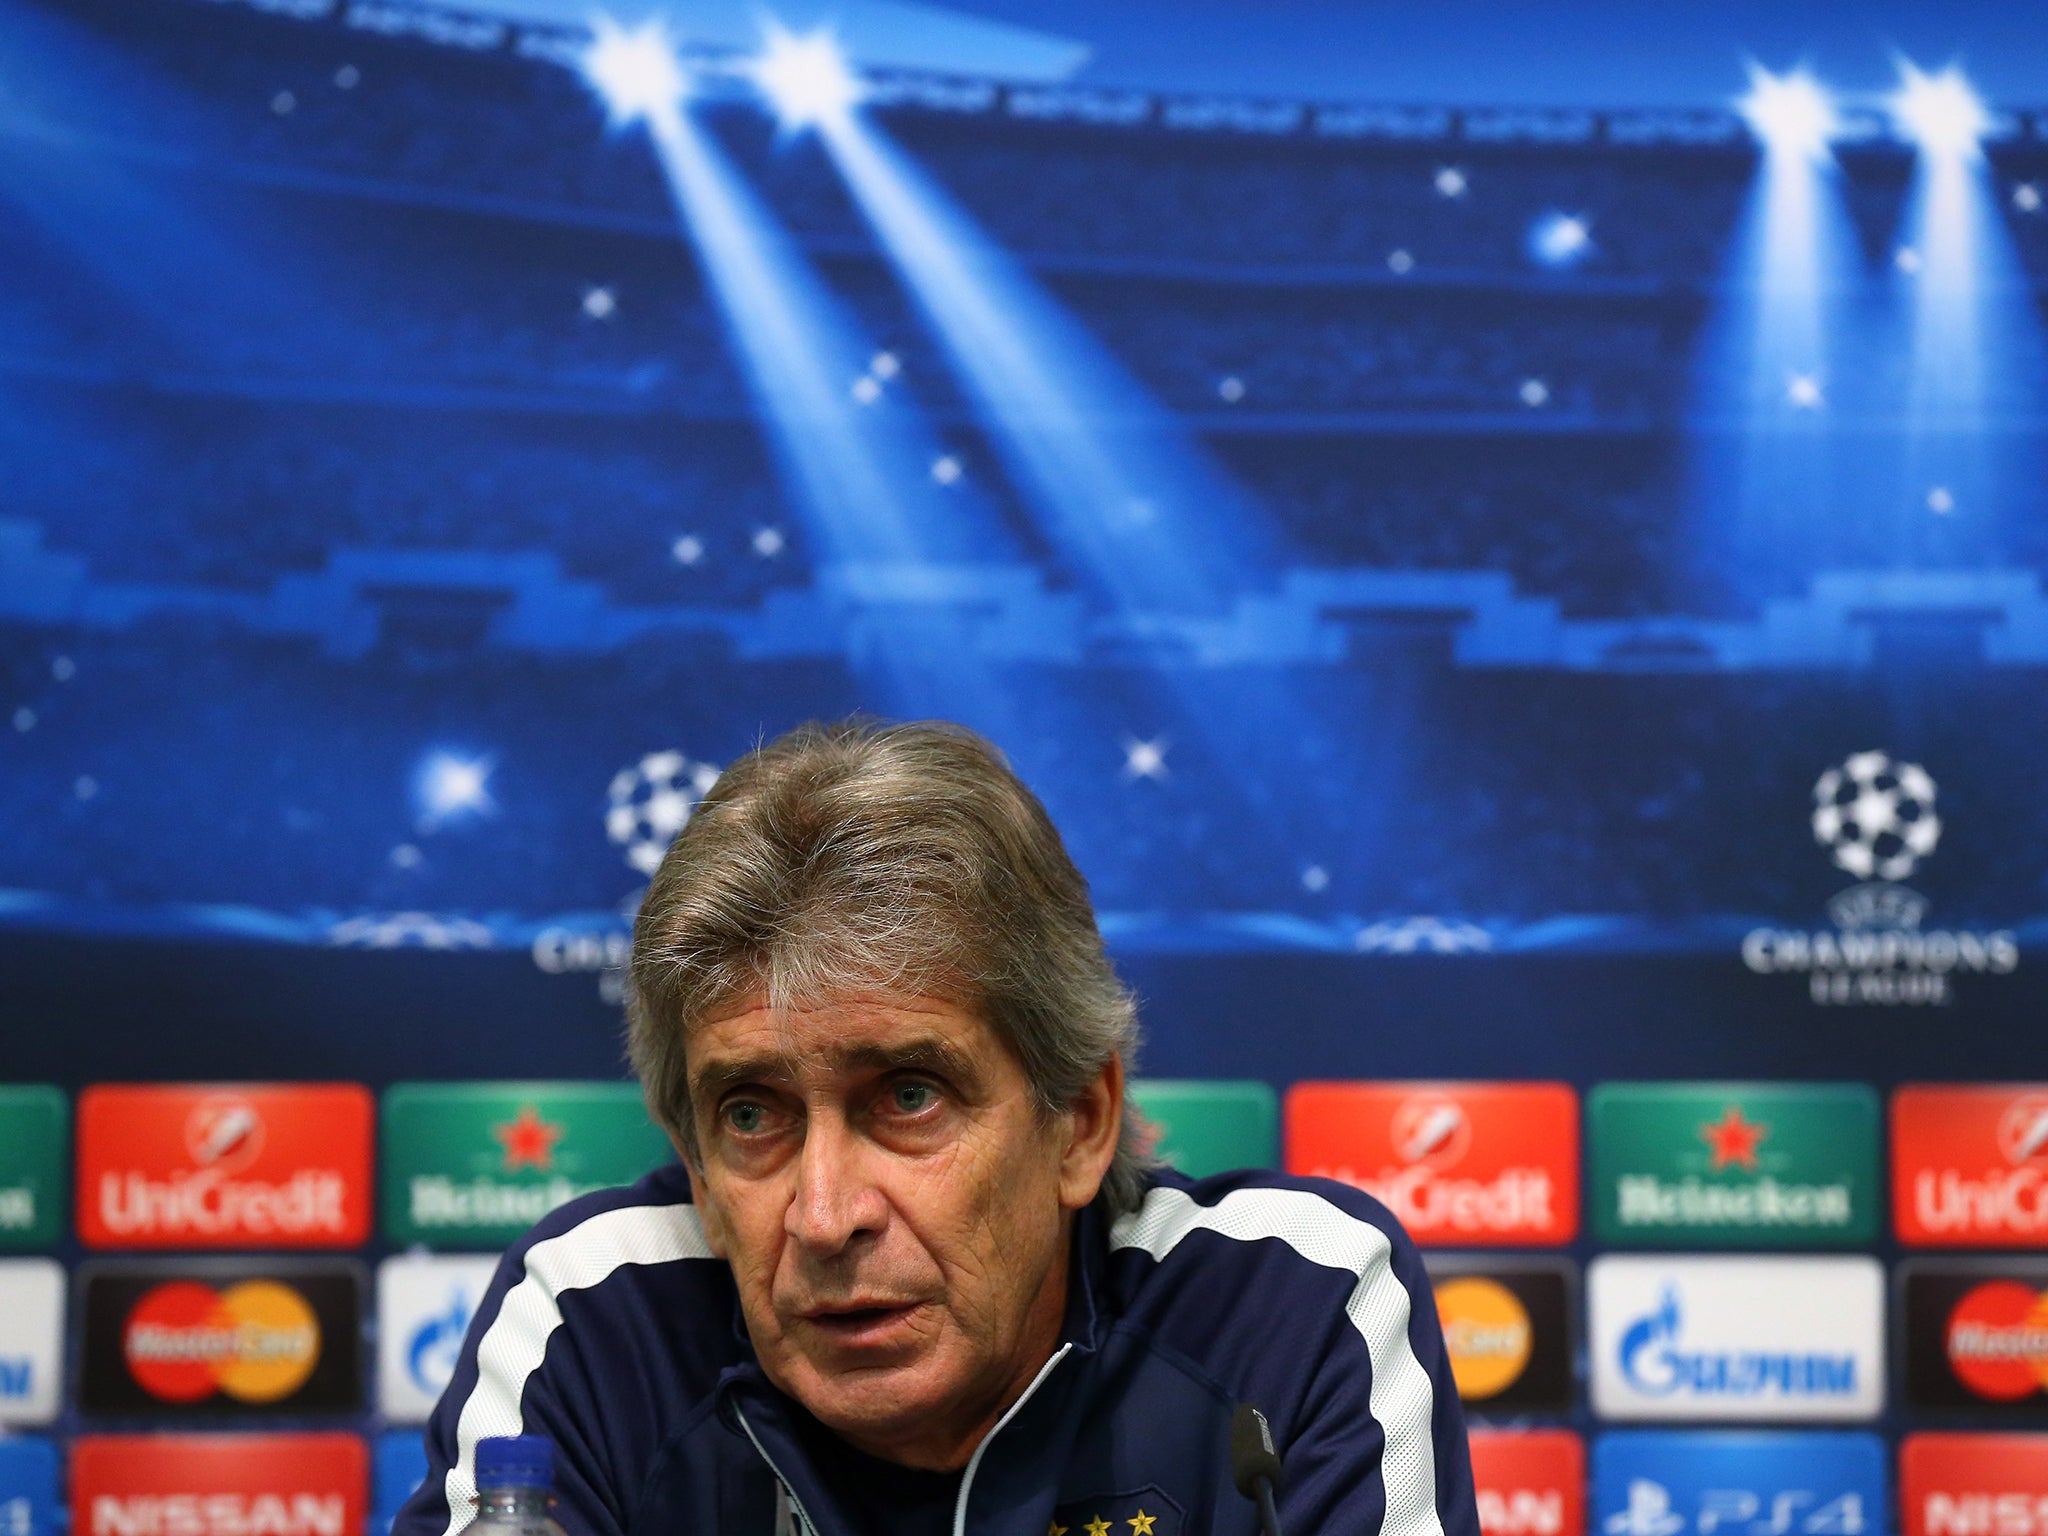 Manuel Pellegrini has adhered to the owners’ preferred style of play and works well with the club hierarchy